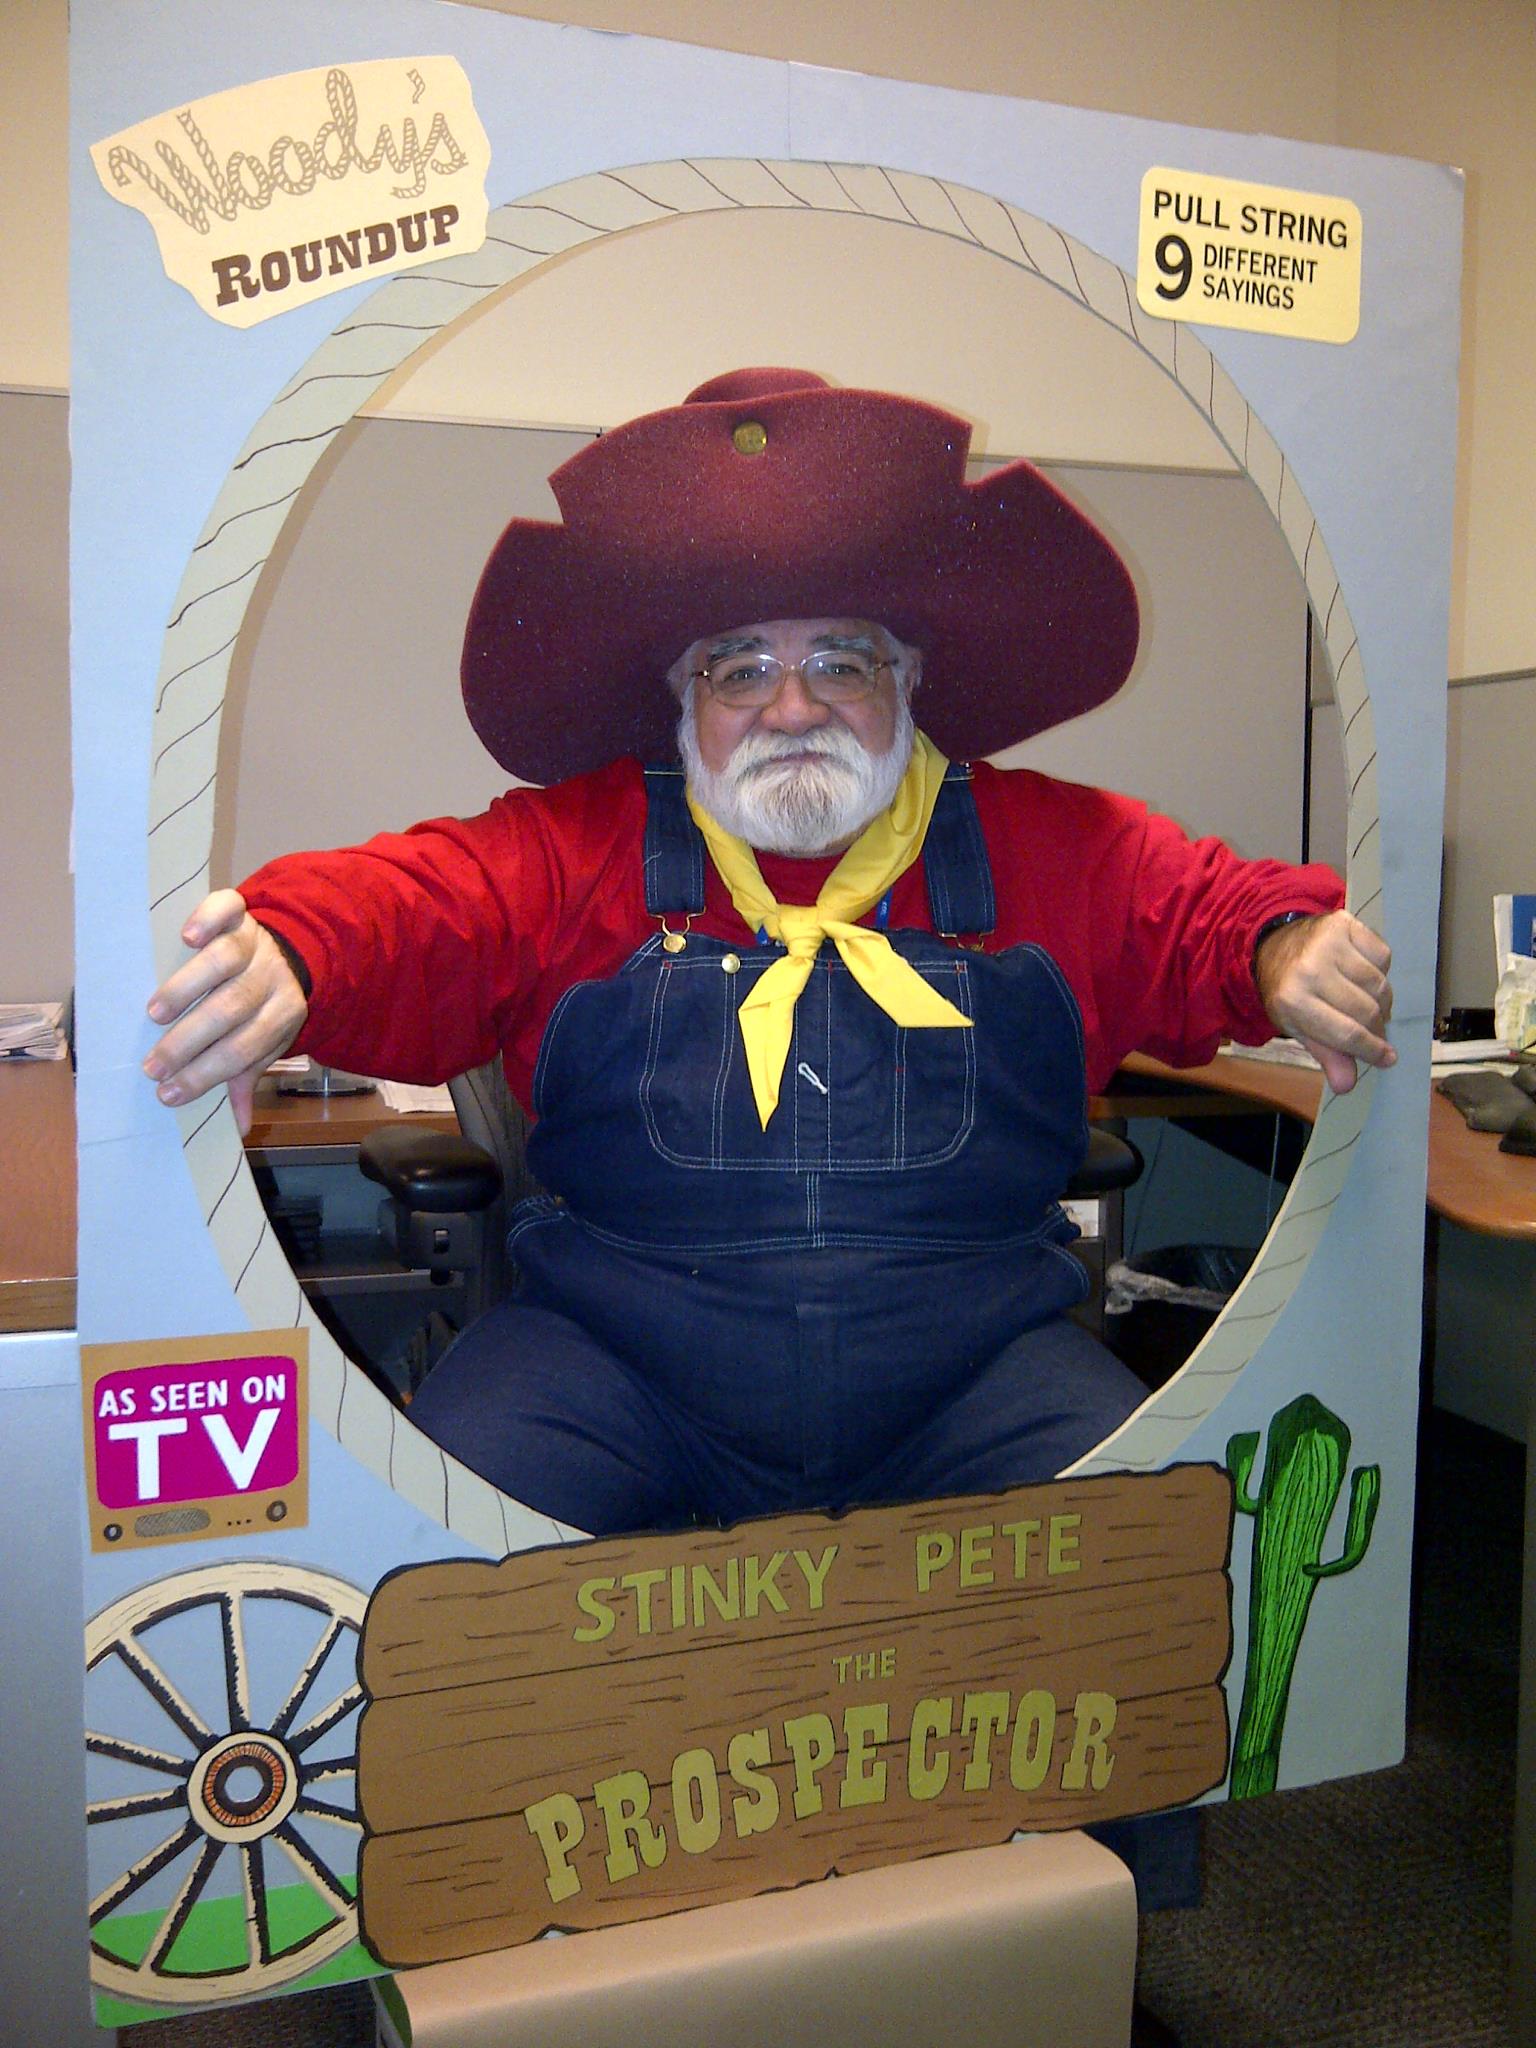 toy story halloween costumes - Pull String 9 Different Roundup Sayings As Seen On o Cd Stinky Pete Le Prospector